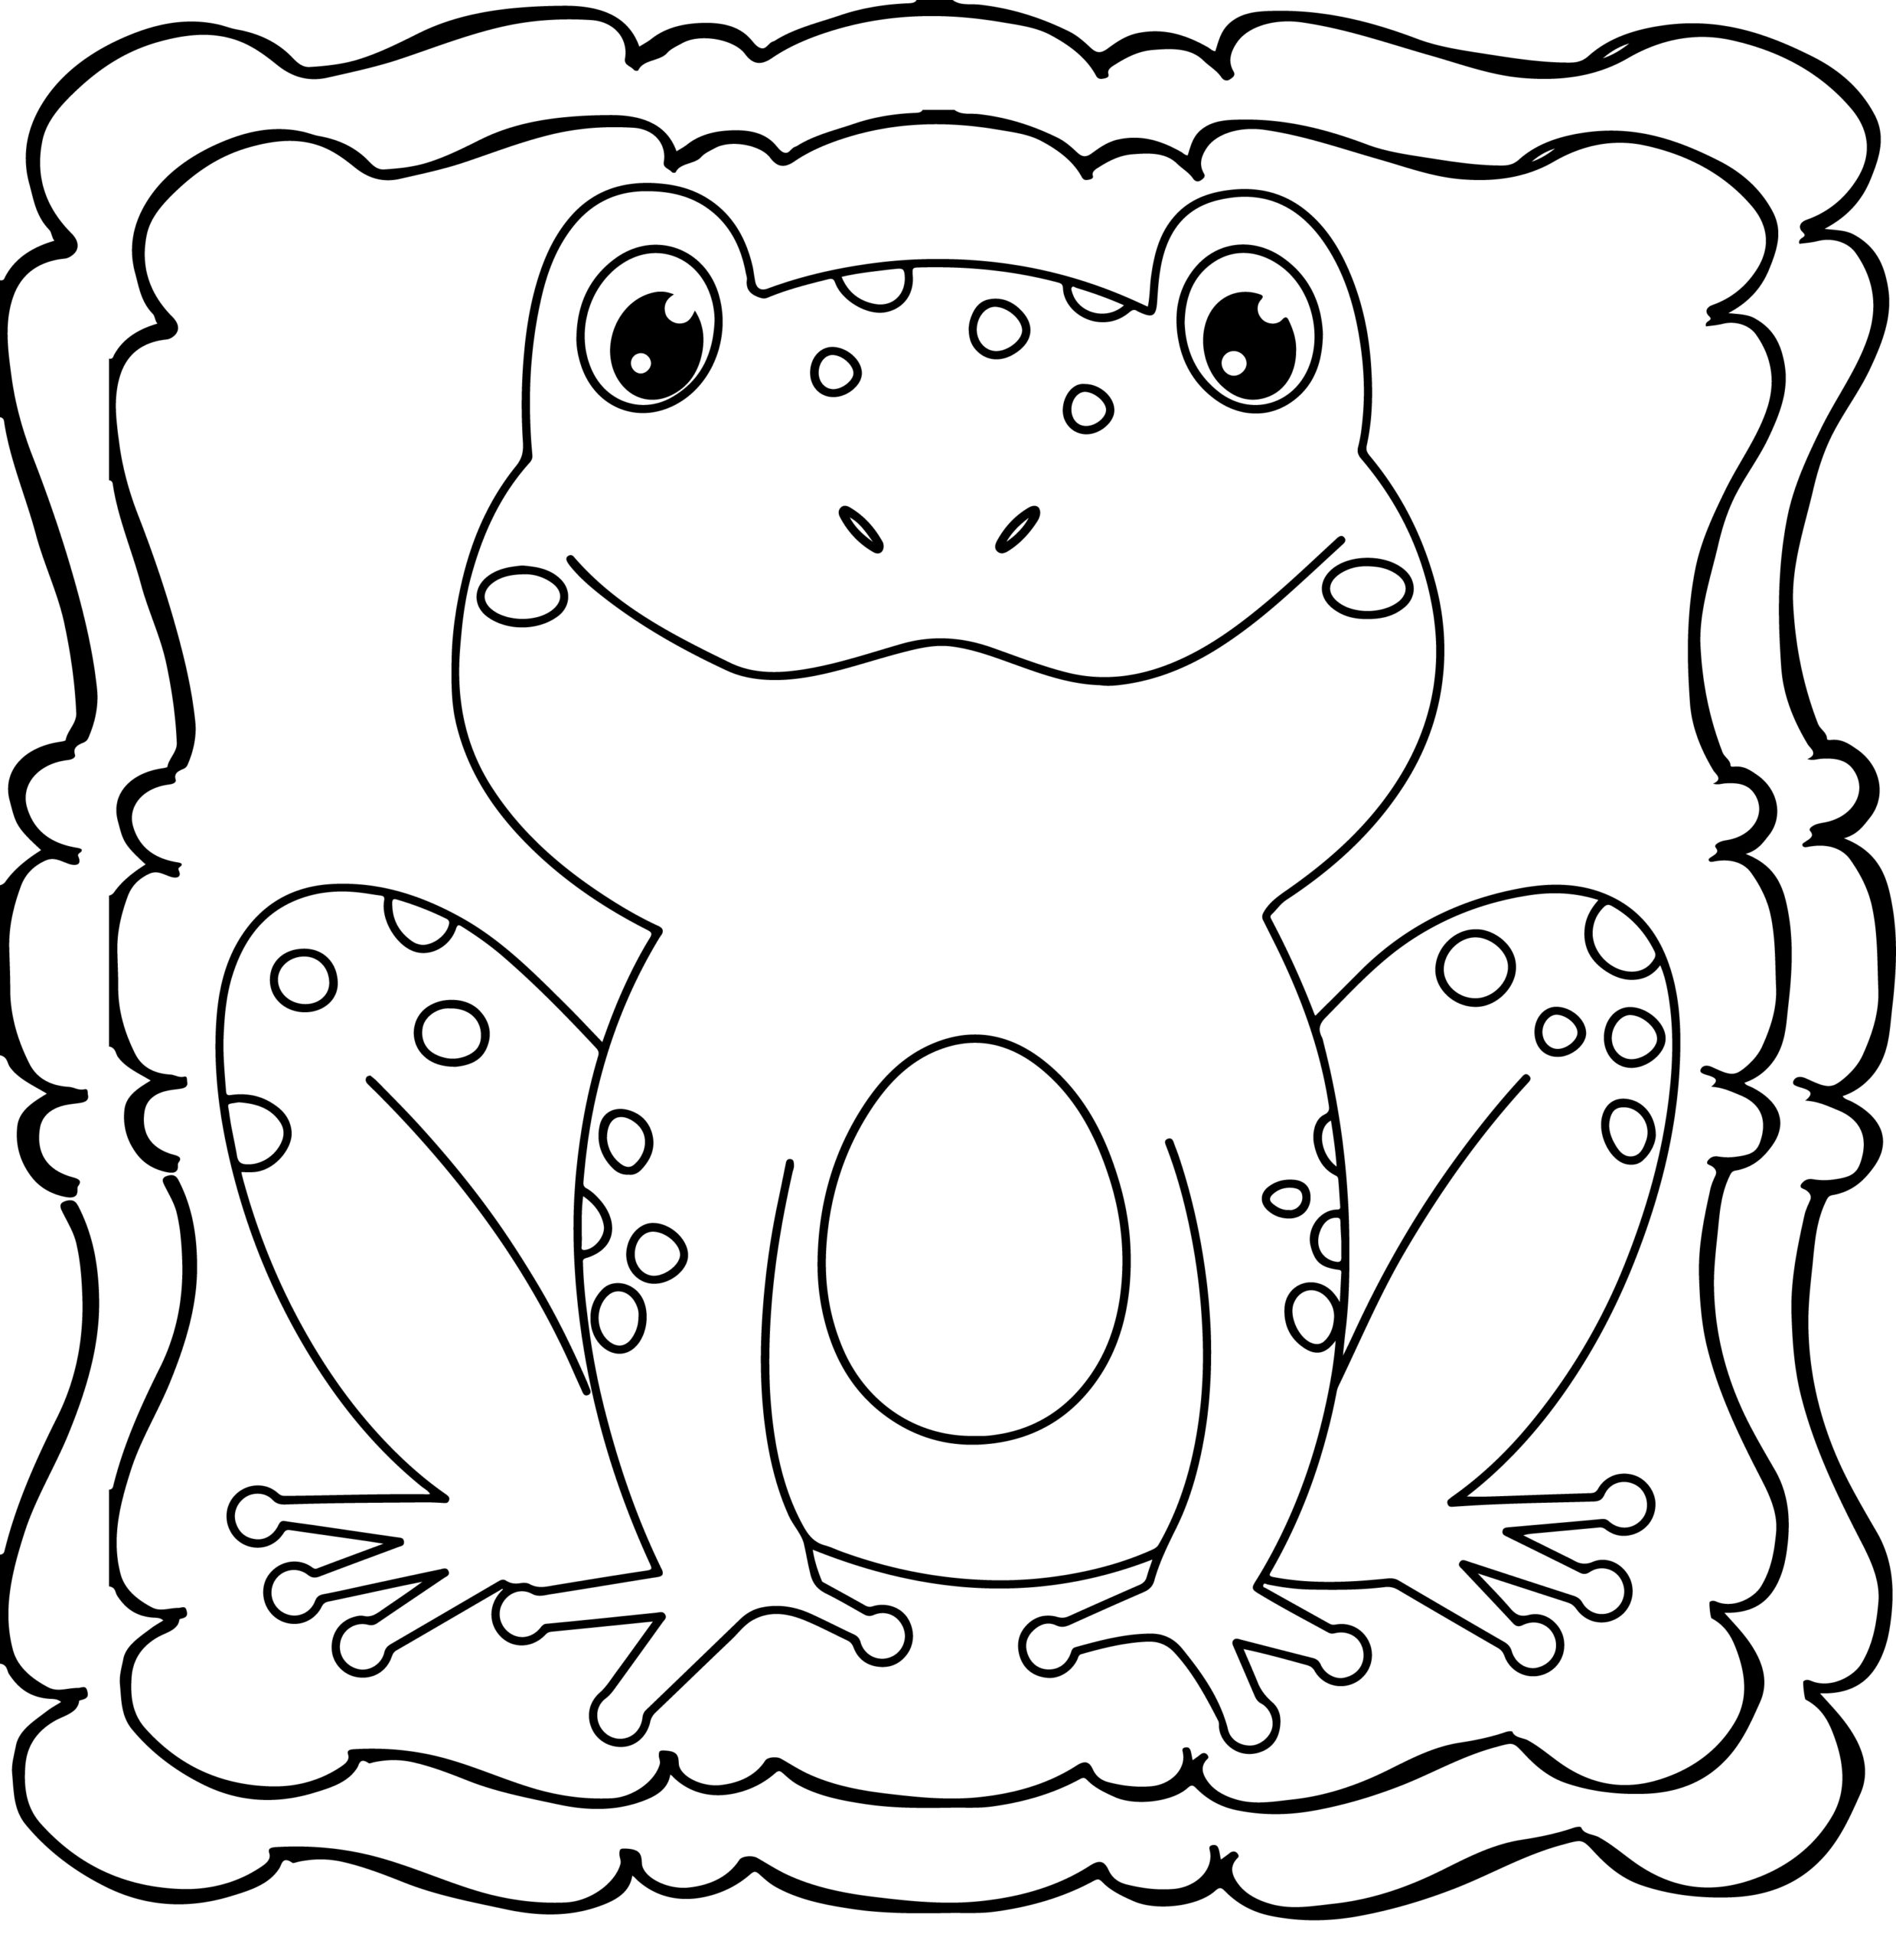 Frog coloring book easy and fun frogs coloring book for kids made by teachers